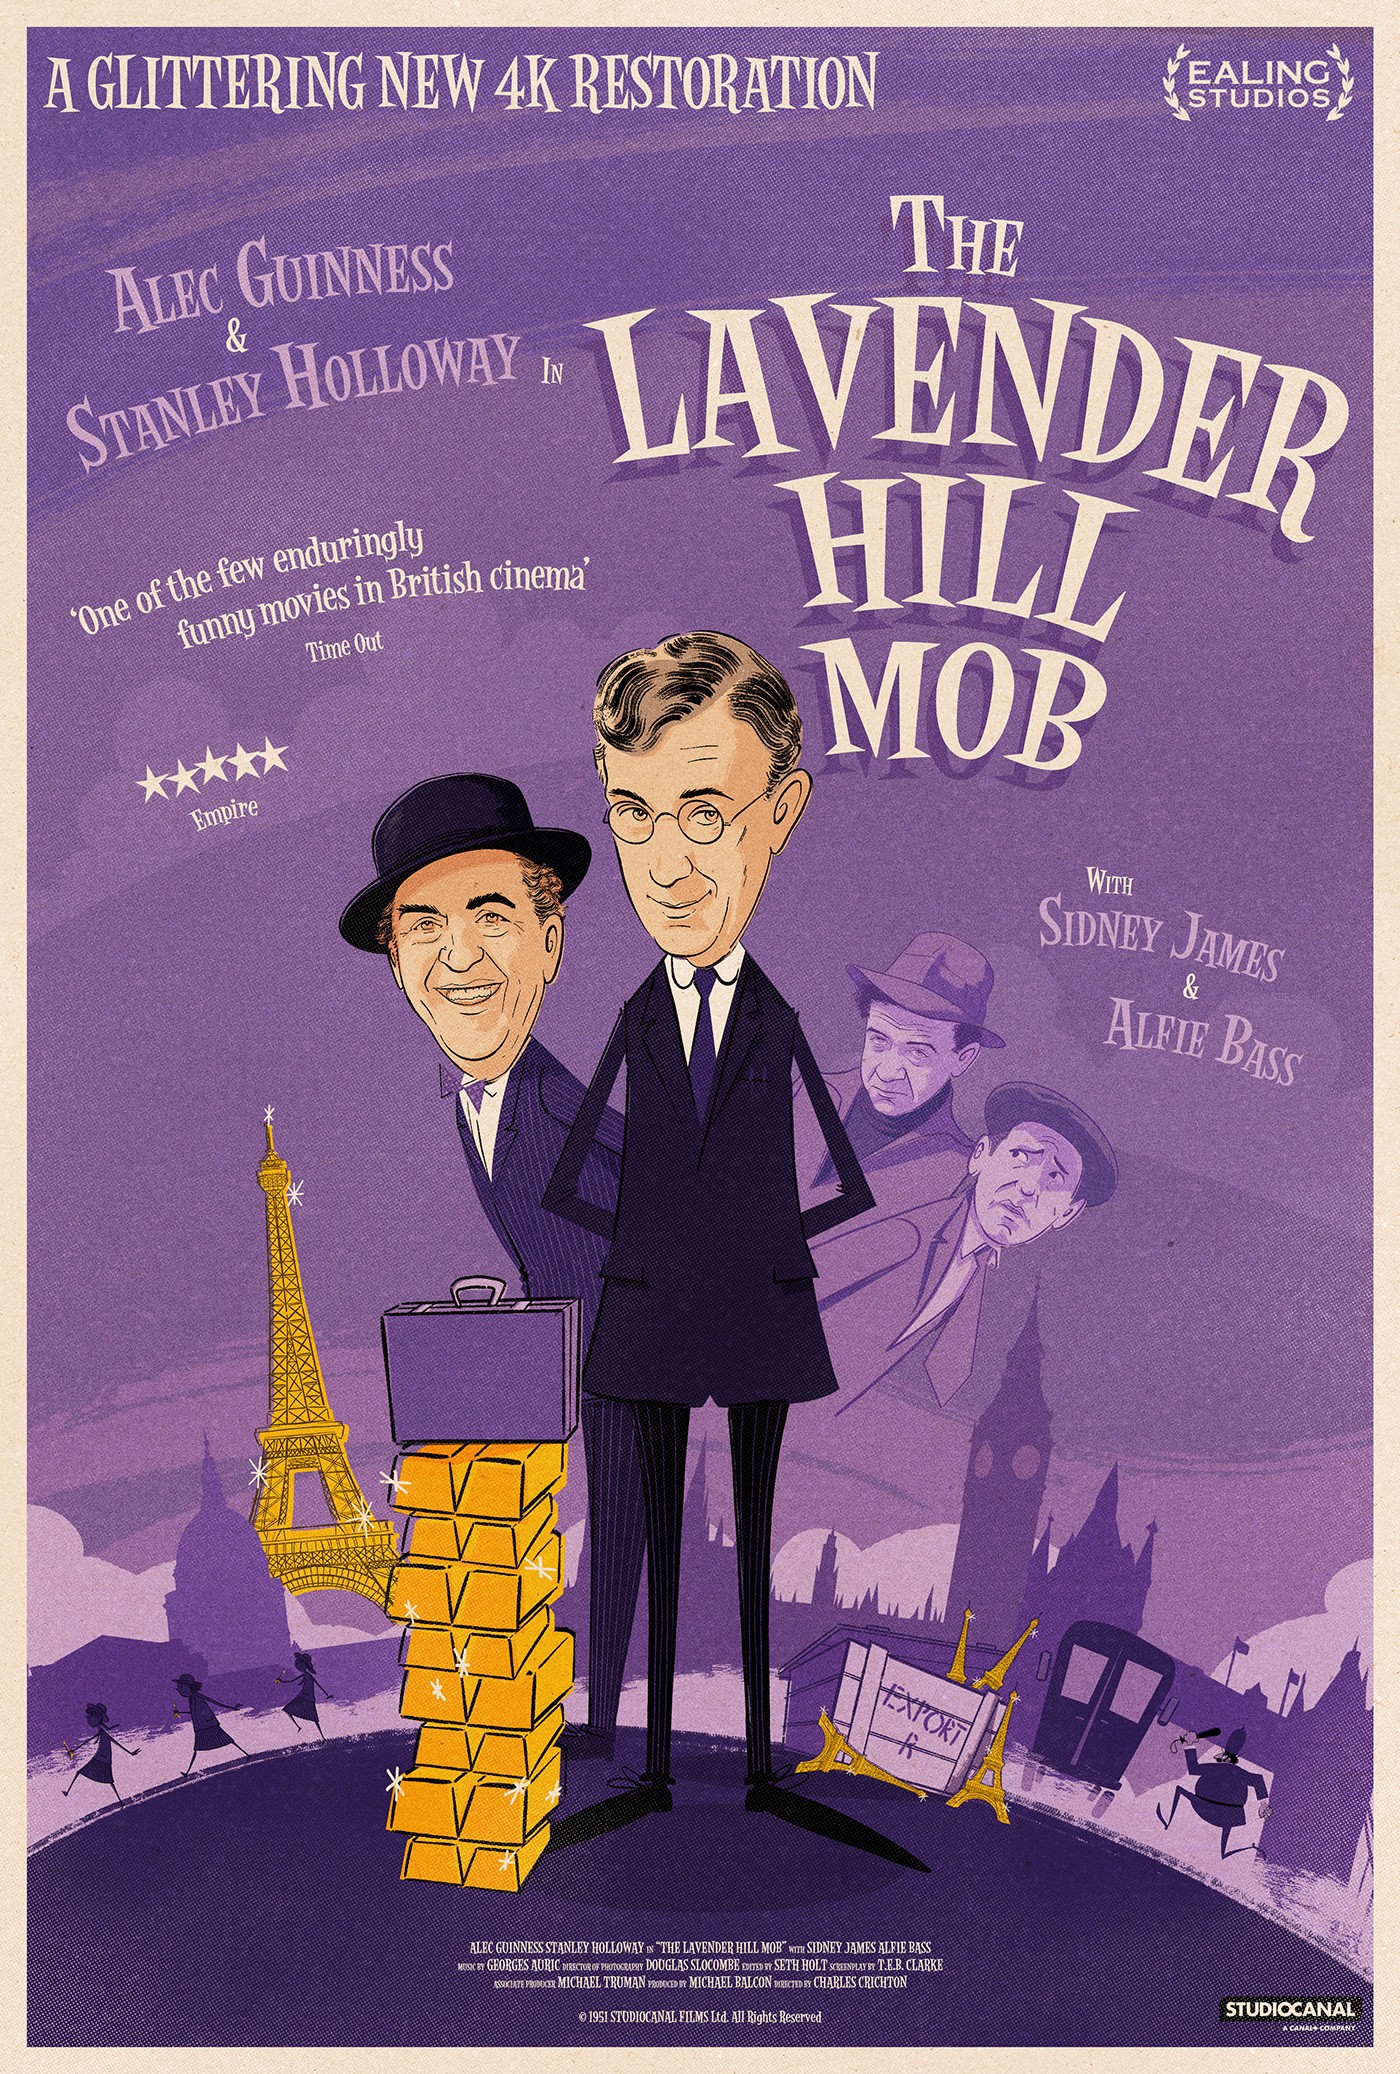 THE LAVENDER HILL MOB